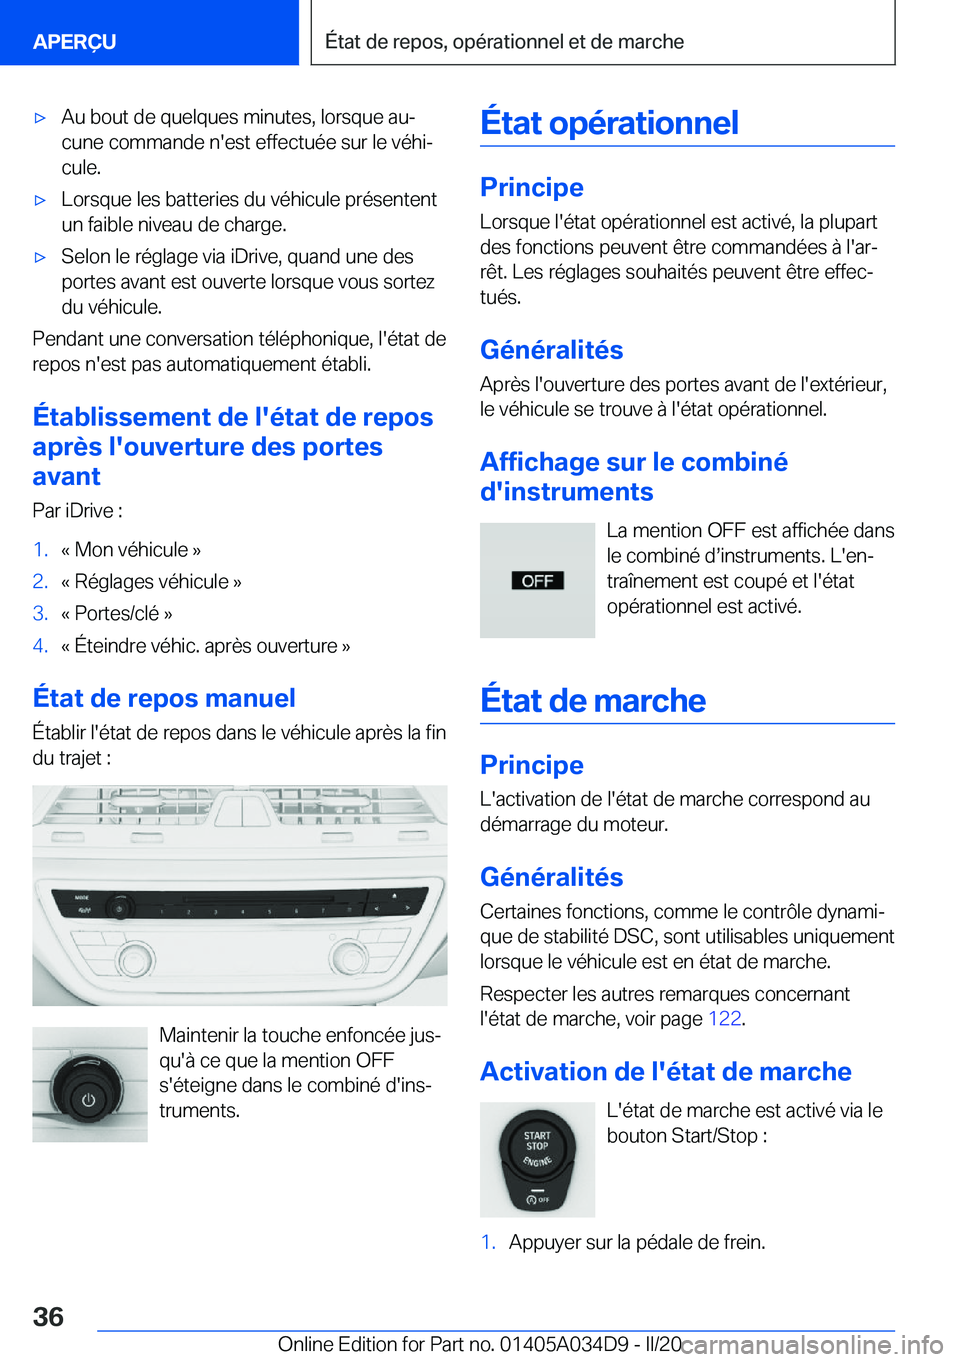 BMW X3 2020  Notices Demploi (in French) 'x�A�u��b�o�u�t��d�e��q�u�e�l�q�u�e�s��m�i�n�u�t�e�s�,��l�o�r�s�q�u�e��a�uj�c�u�n�e��c�o�m�m�a�n�d�e��n�'�e�s�t��e�f�f�e�c�t�u�é�e��s�u�r��l�e��v�é�h�ij�c�u�l�e�.'x�L�o�r�s